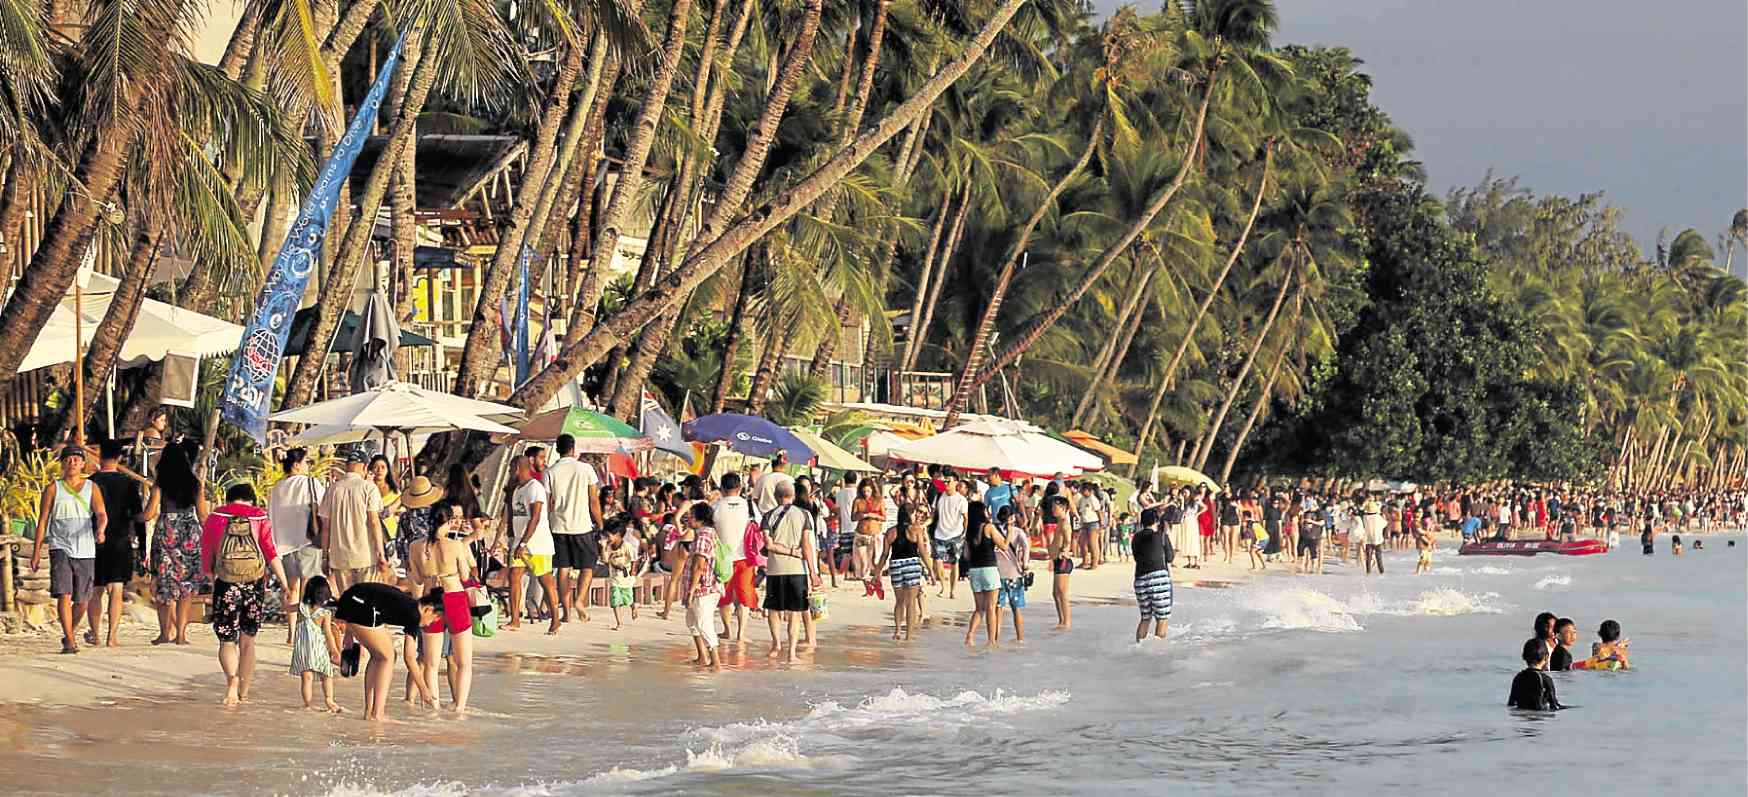 Keep ‘LaBoracay’ parties trash-free, execs told | Inquirer News